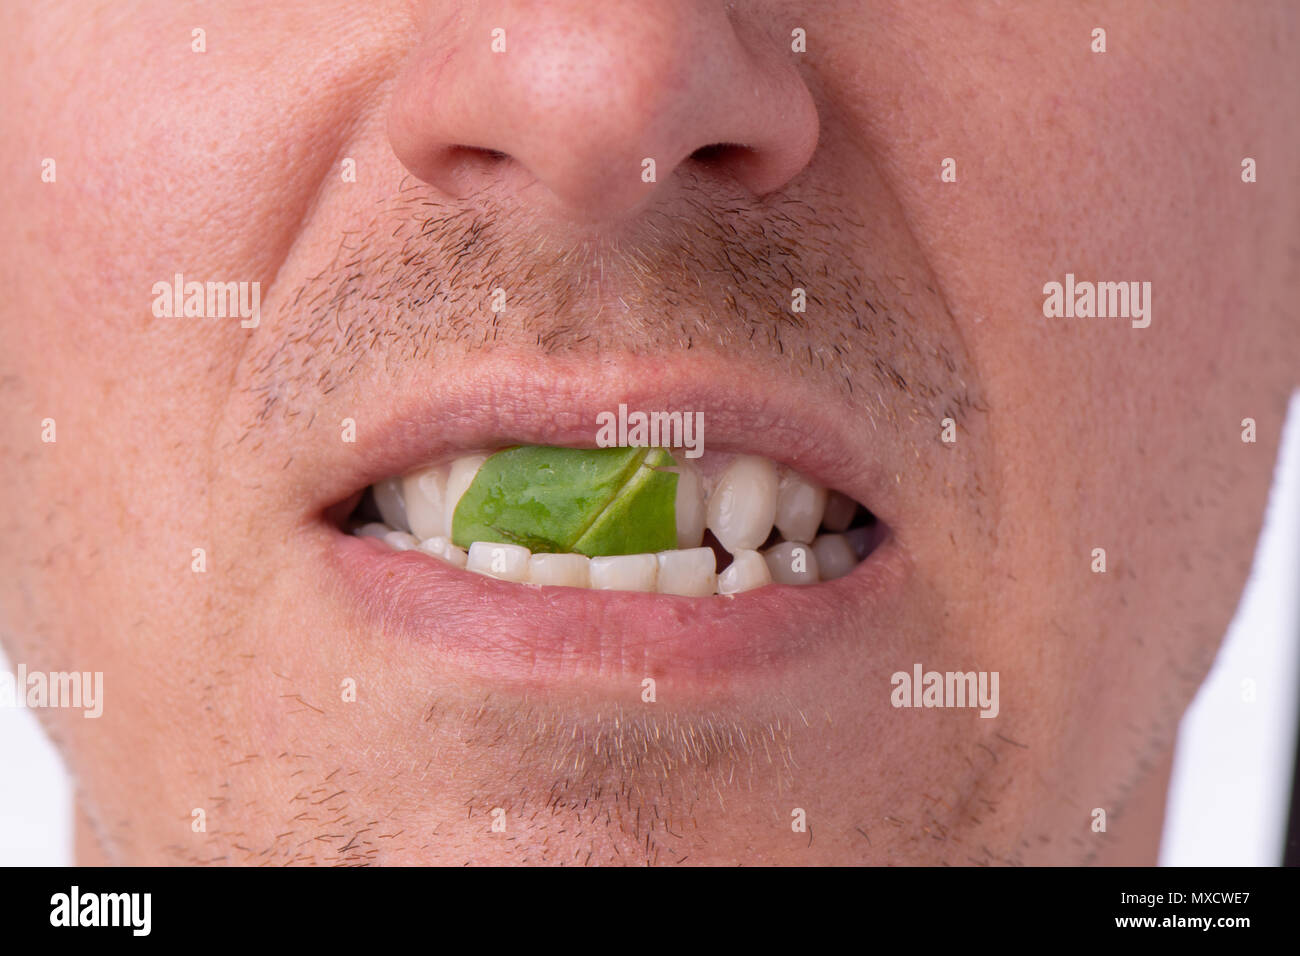 Close-up of bearded man smiling with spinach or salad stuck in her teeth Stock Photo